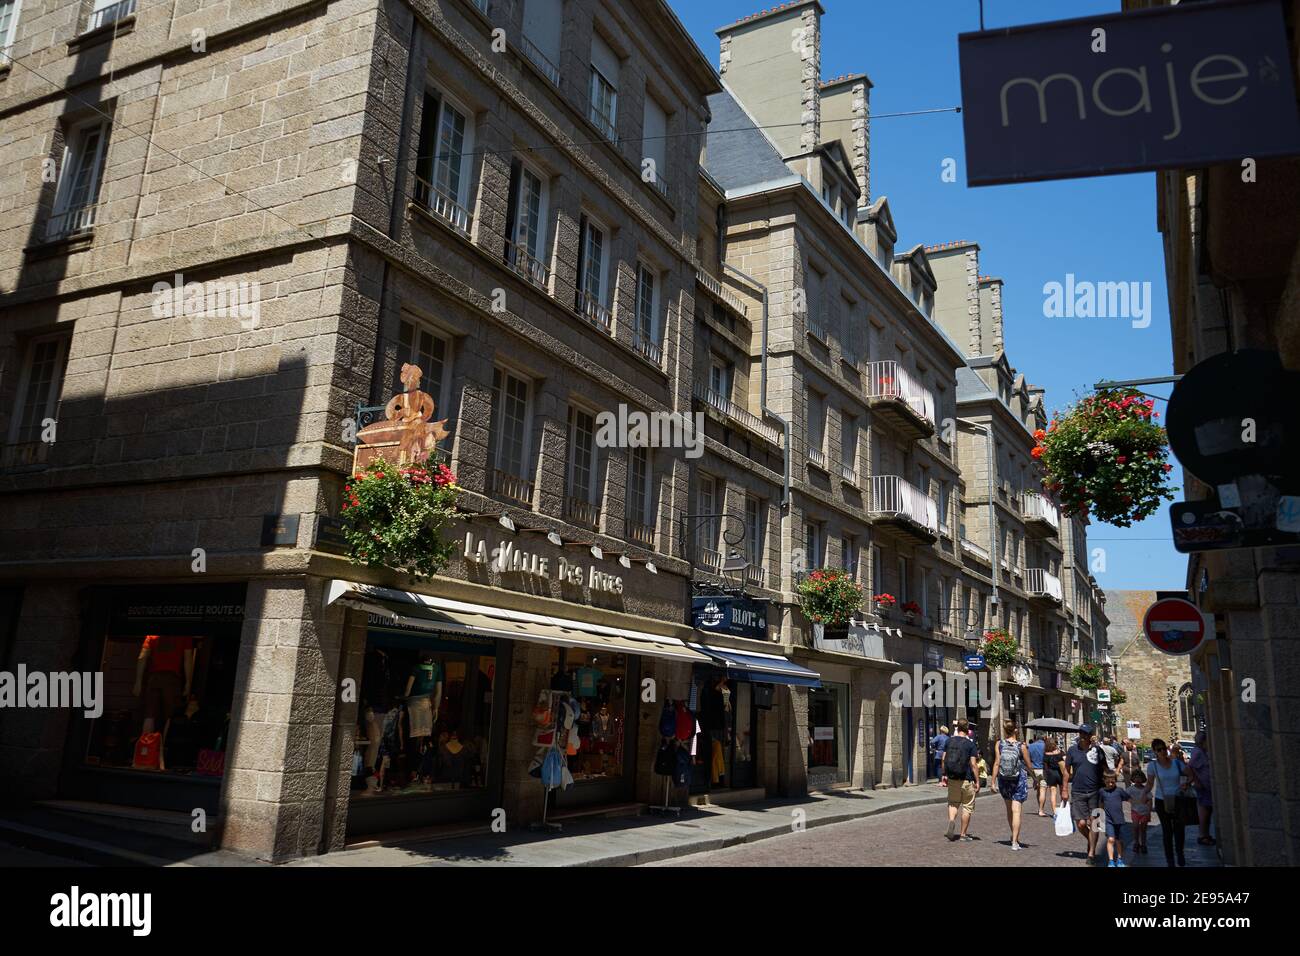 Saint malo shops hi-res stock photography and images - Alamy